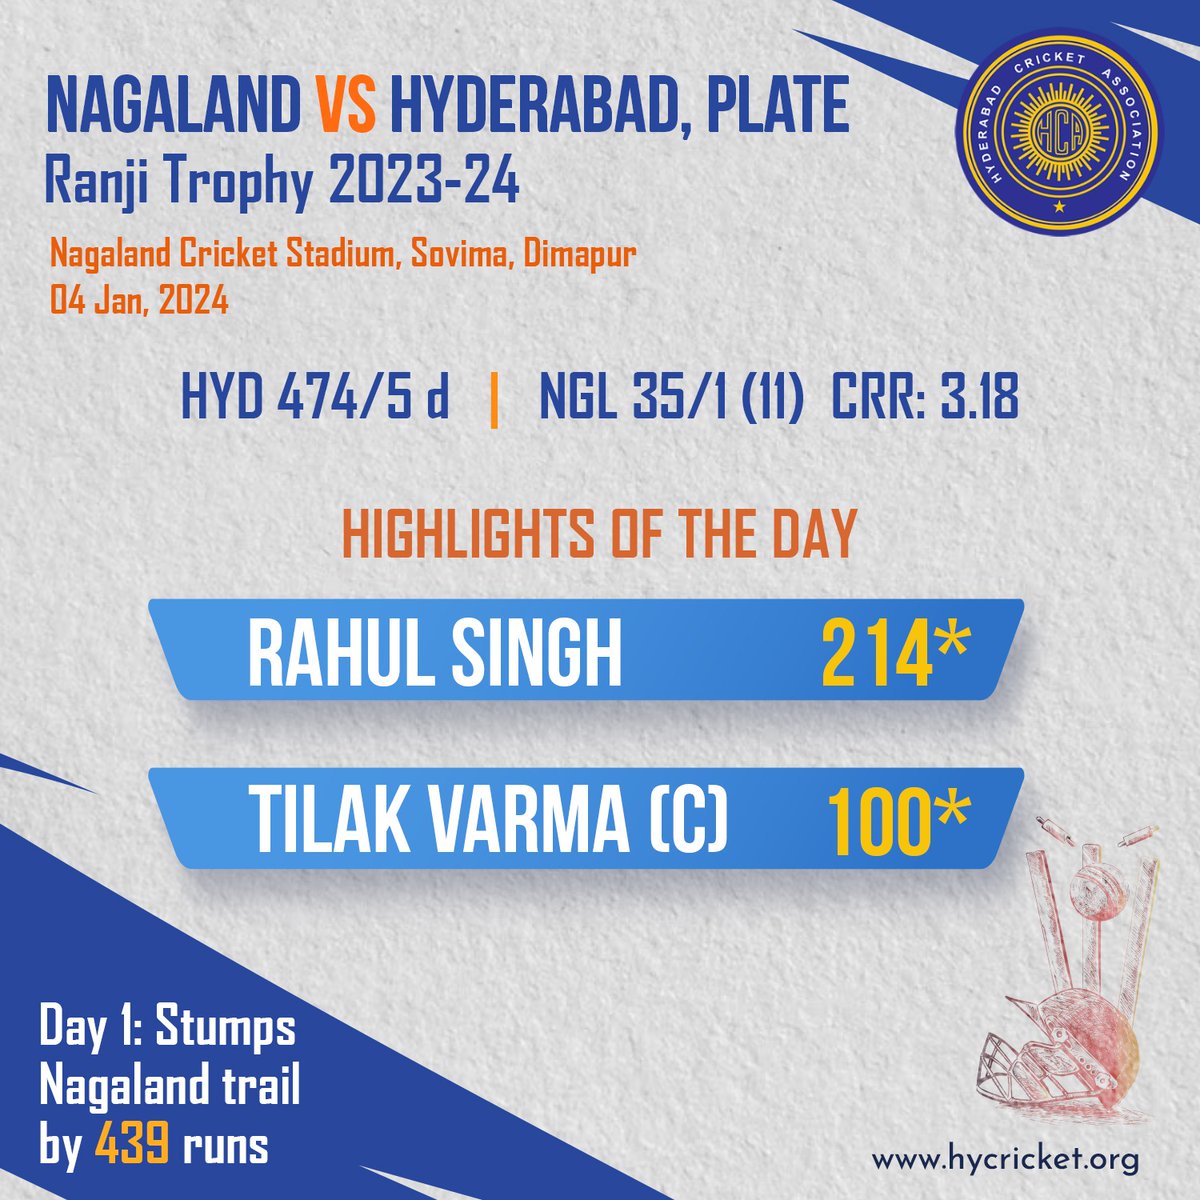 Dream start for Hyderabad men on the first day of Ranji 2024! A 474-run innings to kick off the tournament. #HCA #HyderabadCricket #RanjiTrophy2024 #BCCI #DomesticCricket #cricket